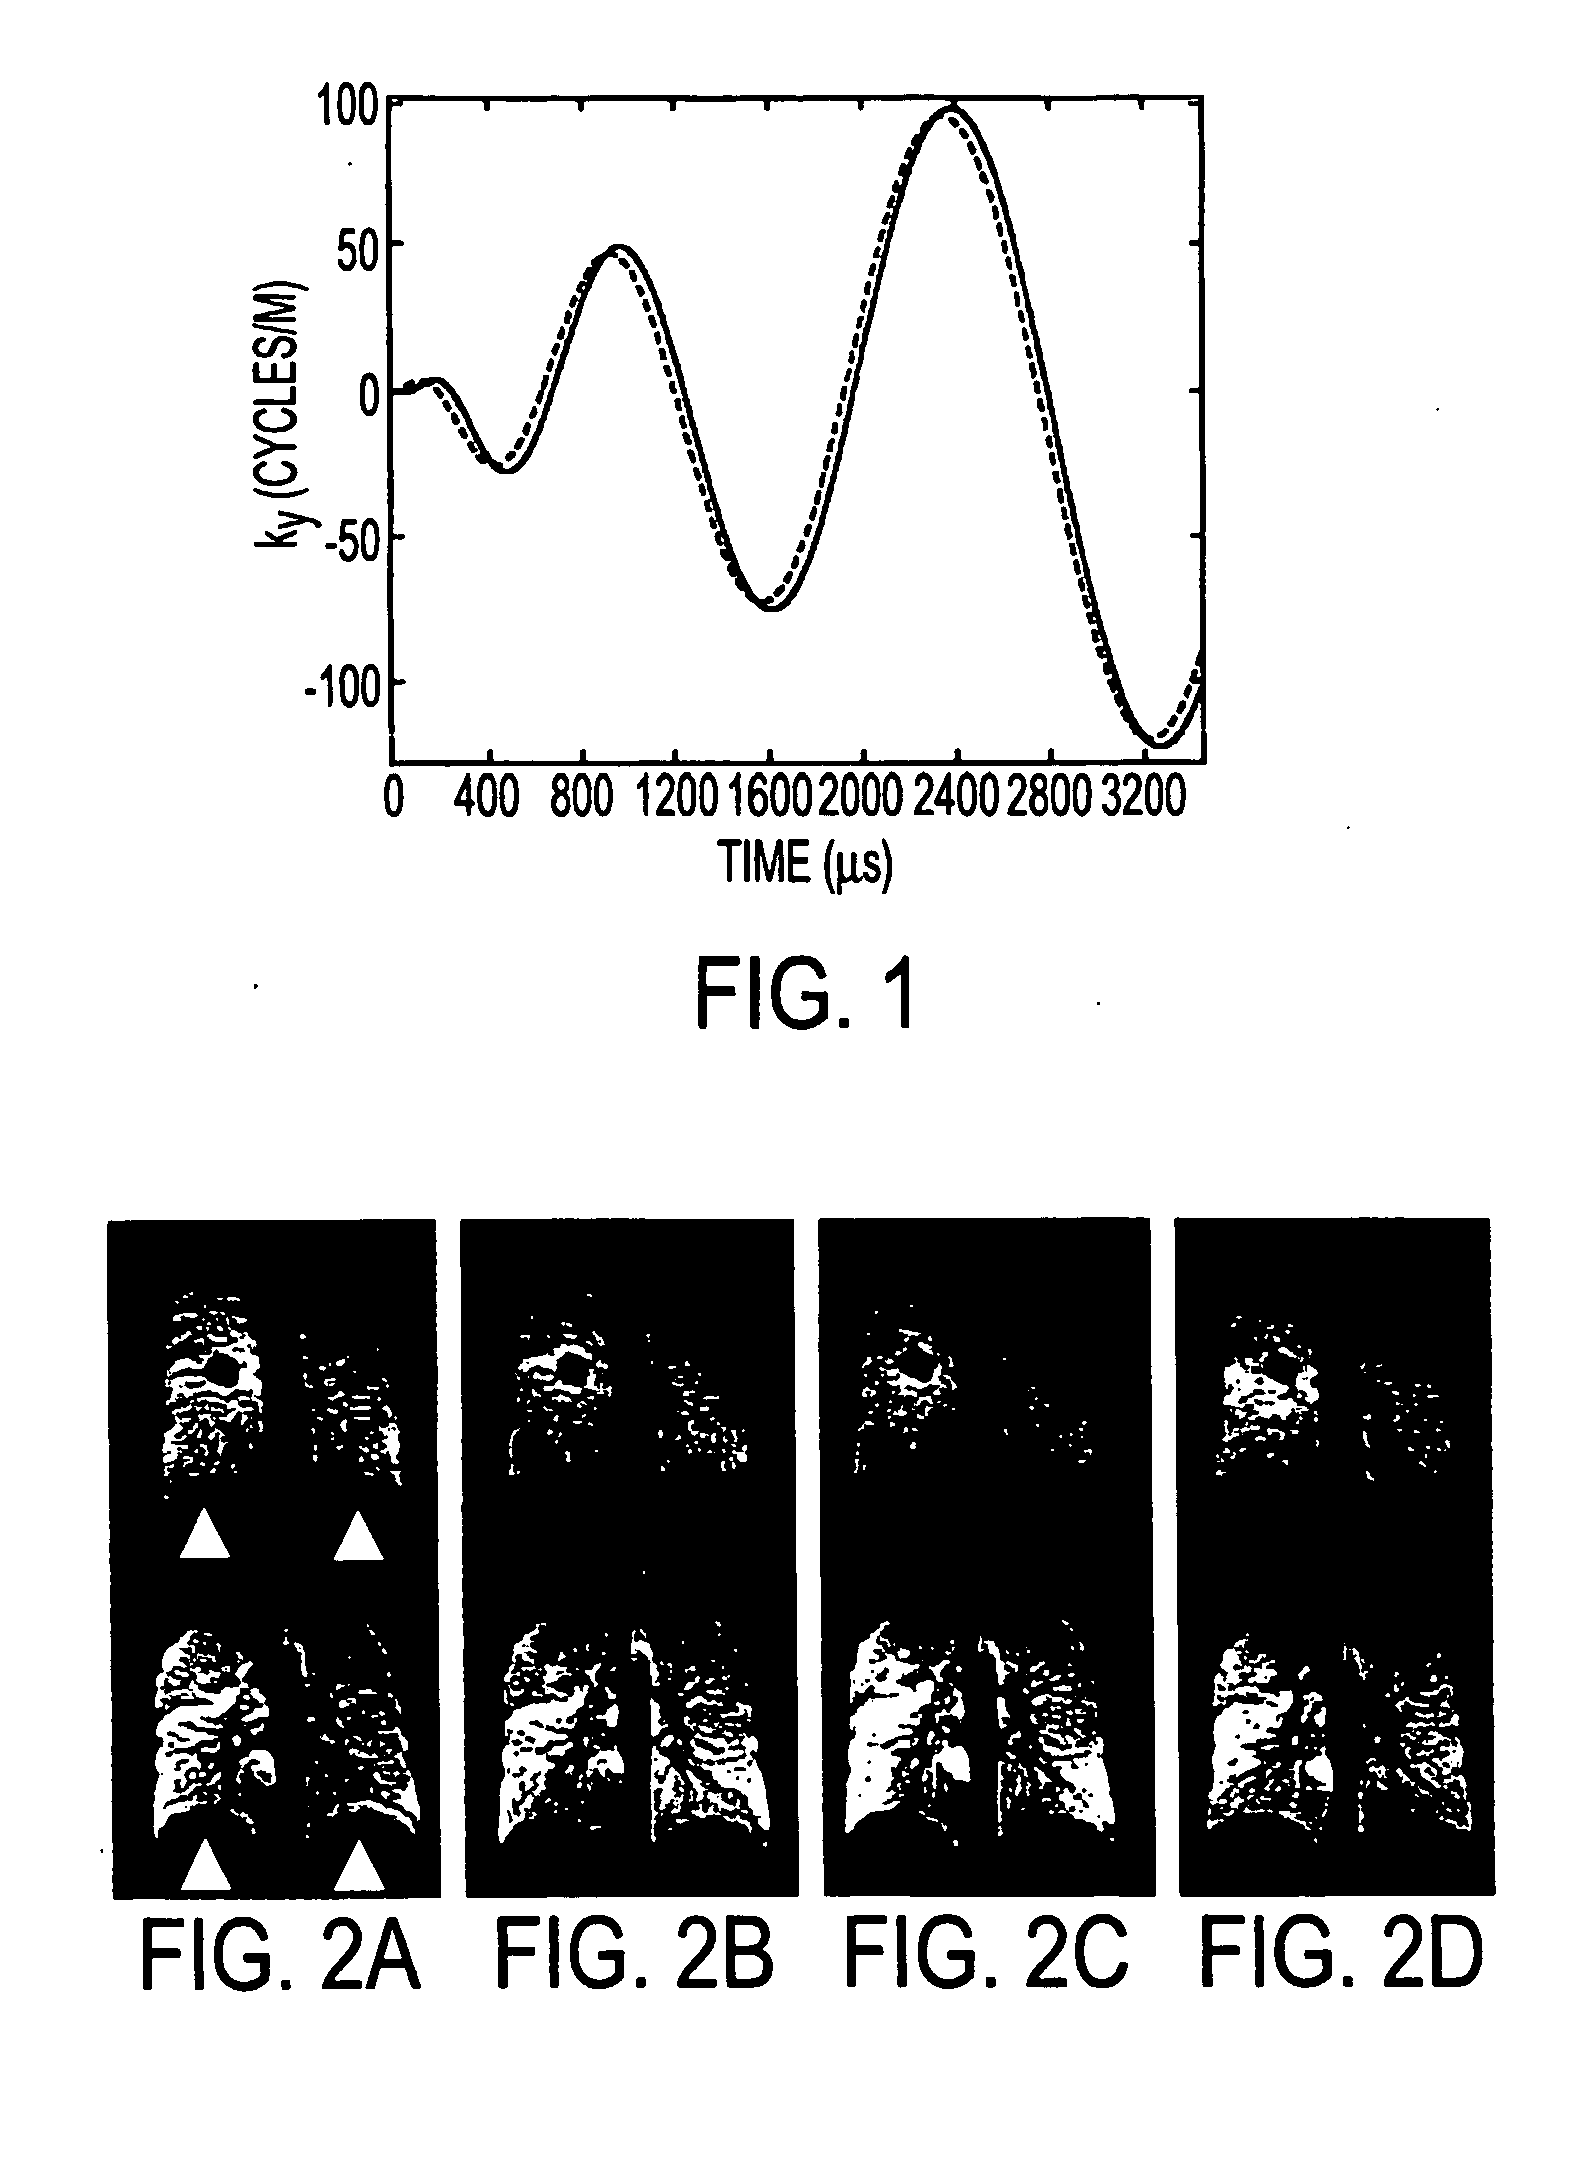 Optimized high-speed magnetic resonance imaging method and system using hyperpolarized noble gases